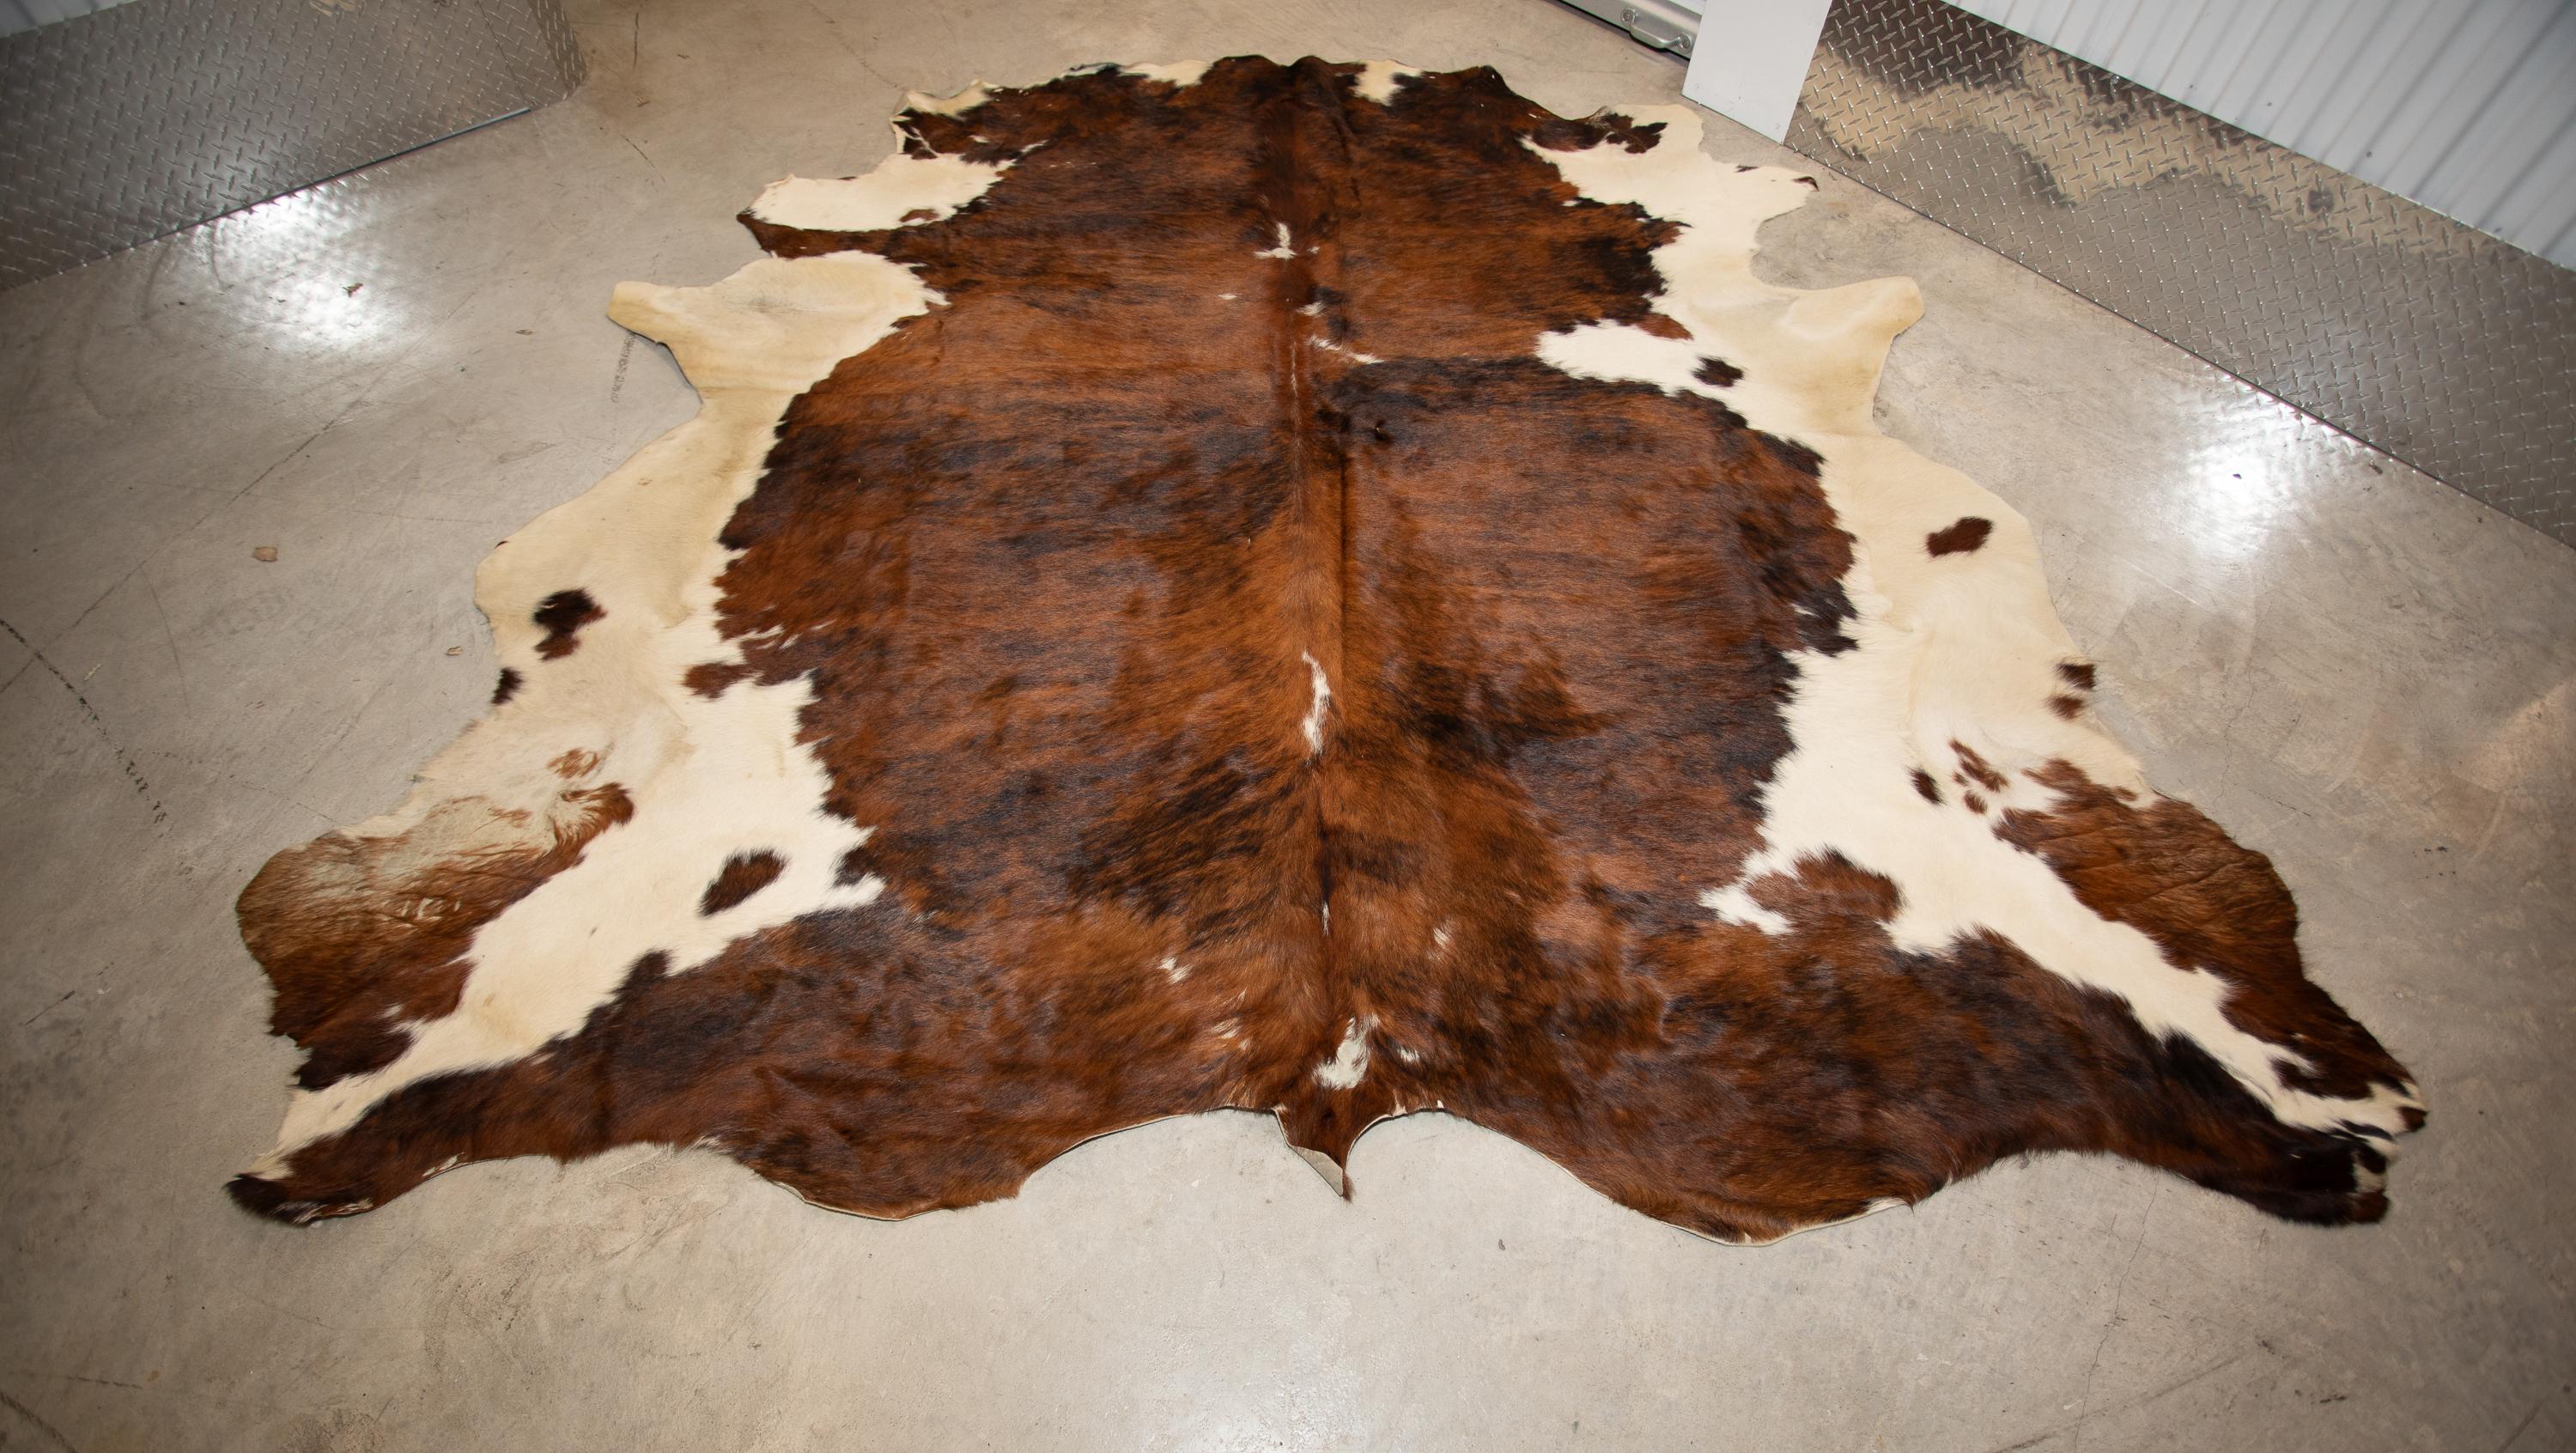 A Large Cowhide rug
Originally purchased from Knoll
Very clean virtually no wear